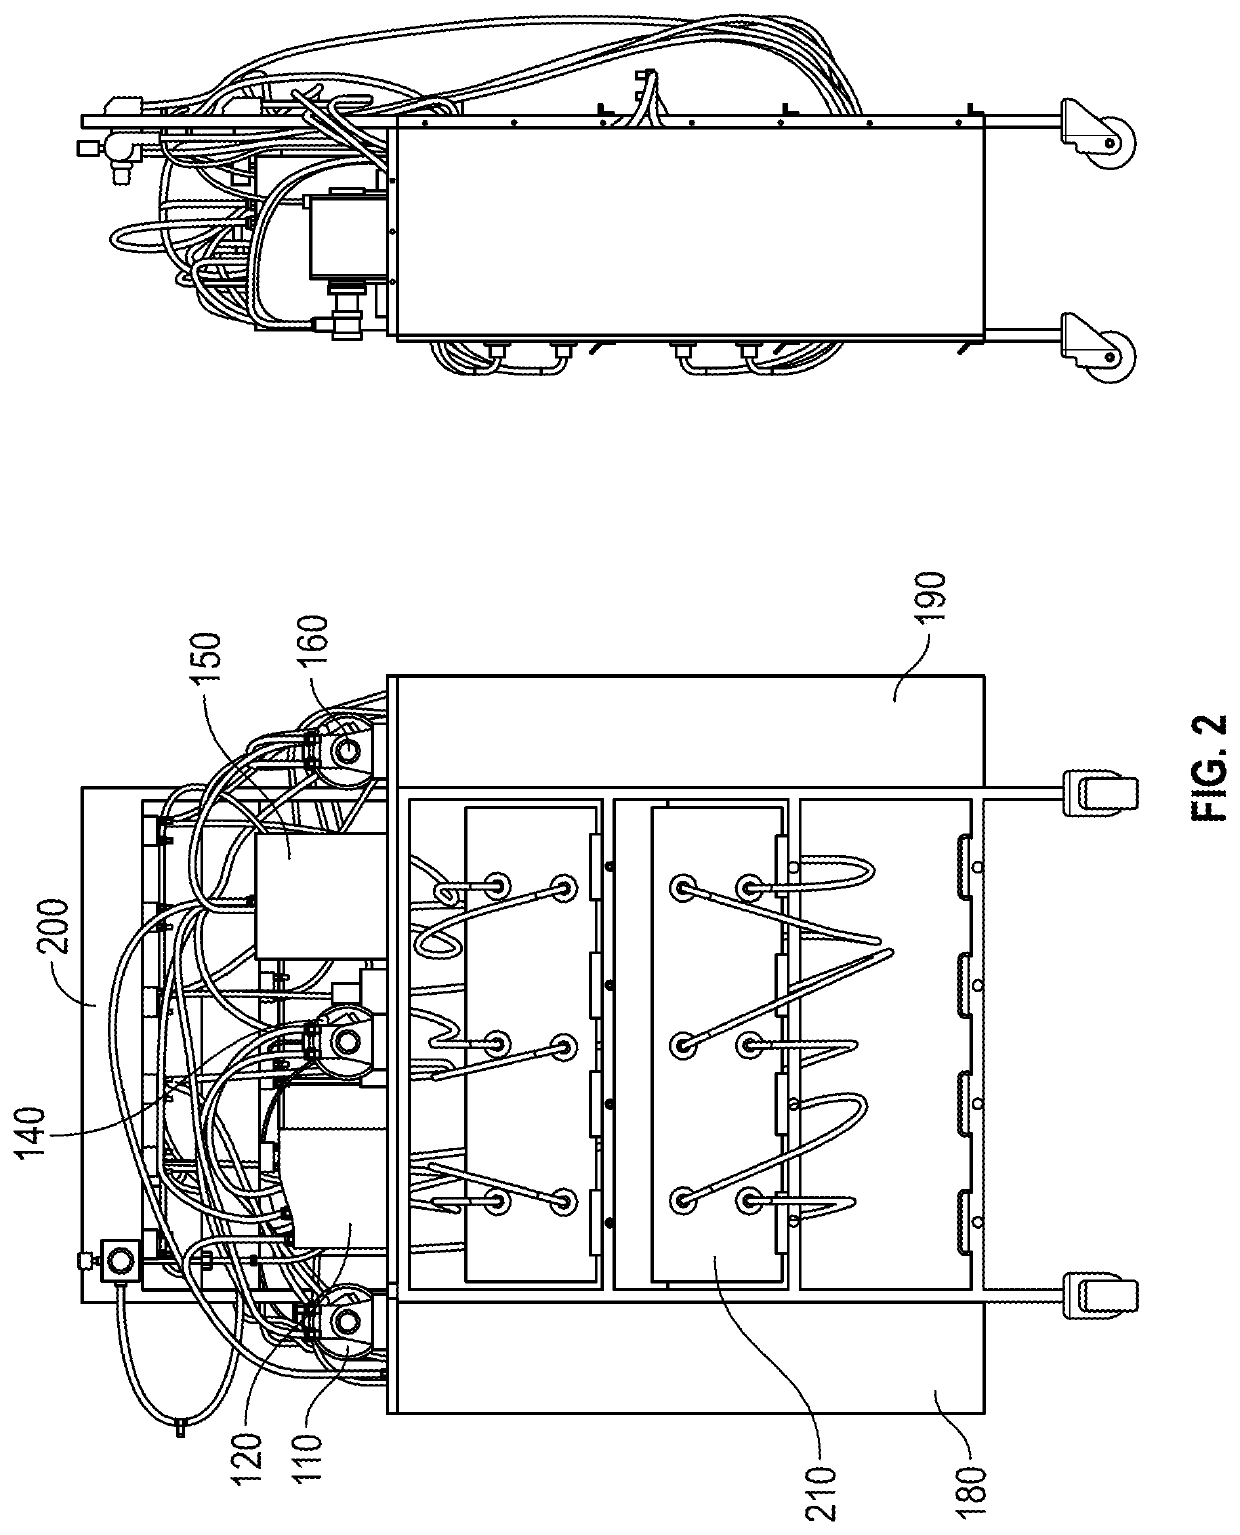 Soda Carbonation and Dispensation System and Method